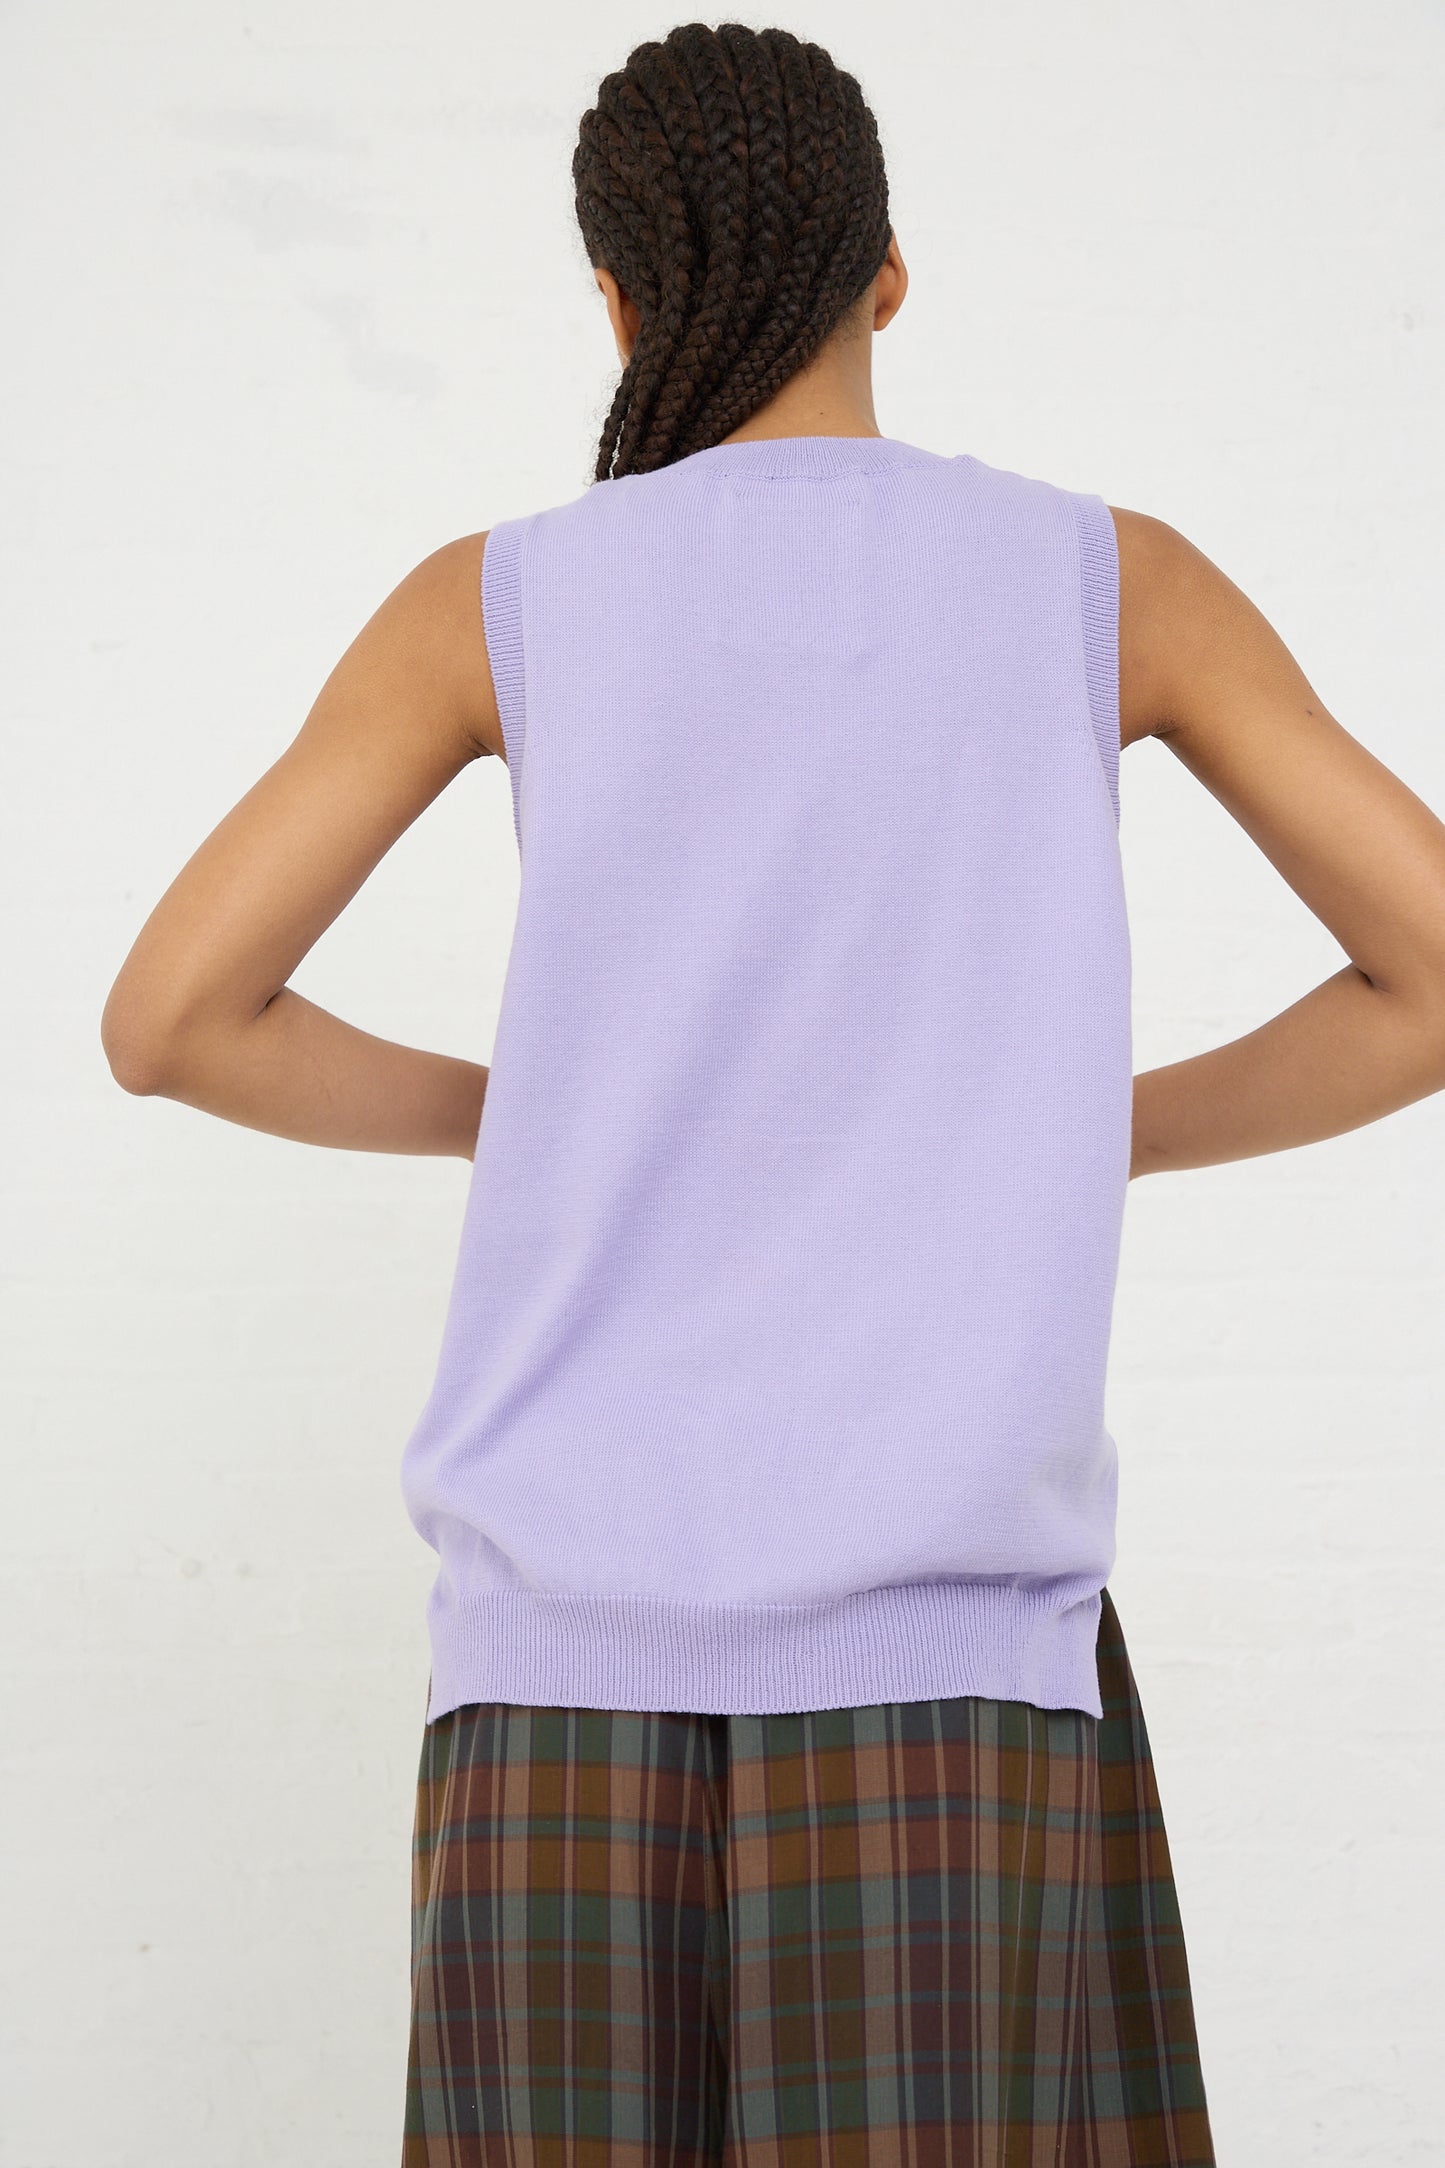 A person from behind wearing a purple sleeveless Organic Cotton Tank Top in Cardo and plaid trousers by Cordera.